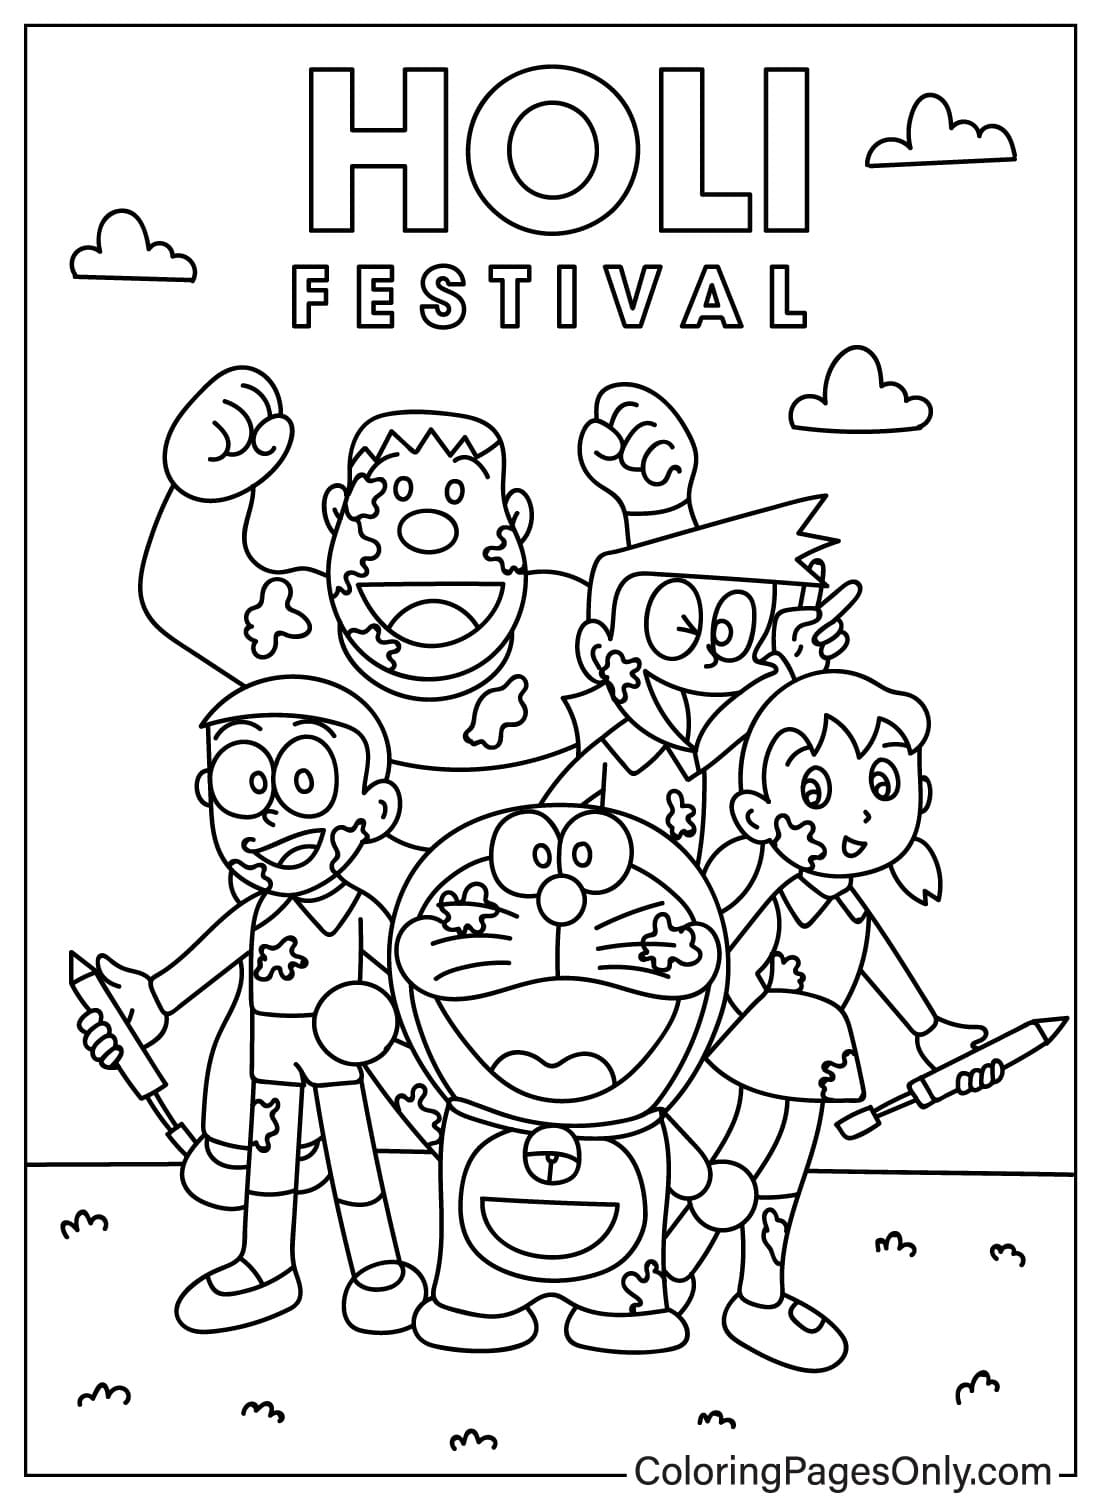 Holi Cartoon Coloring Page from Holi